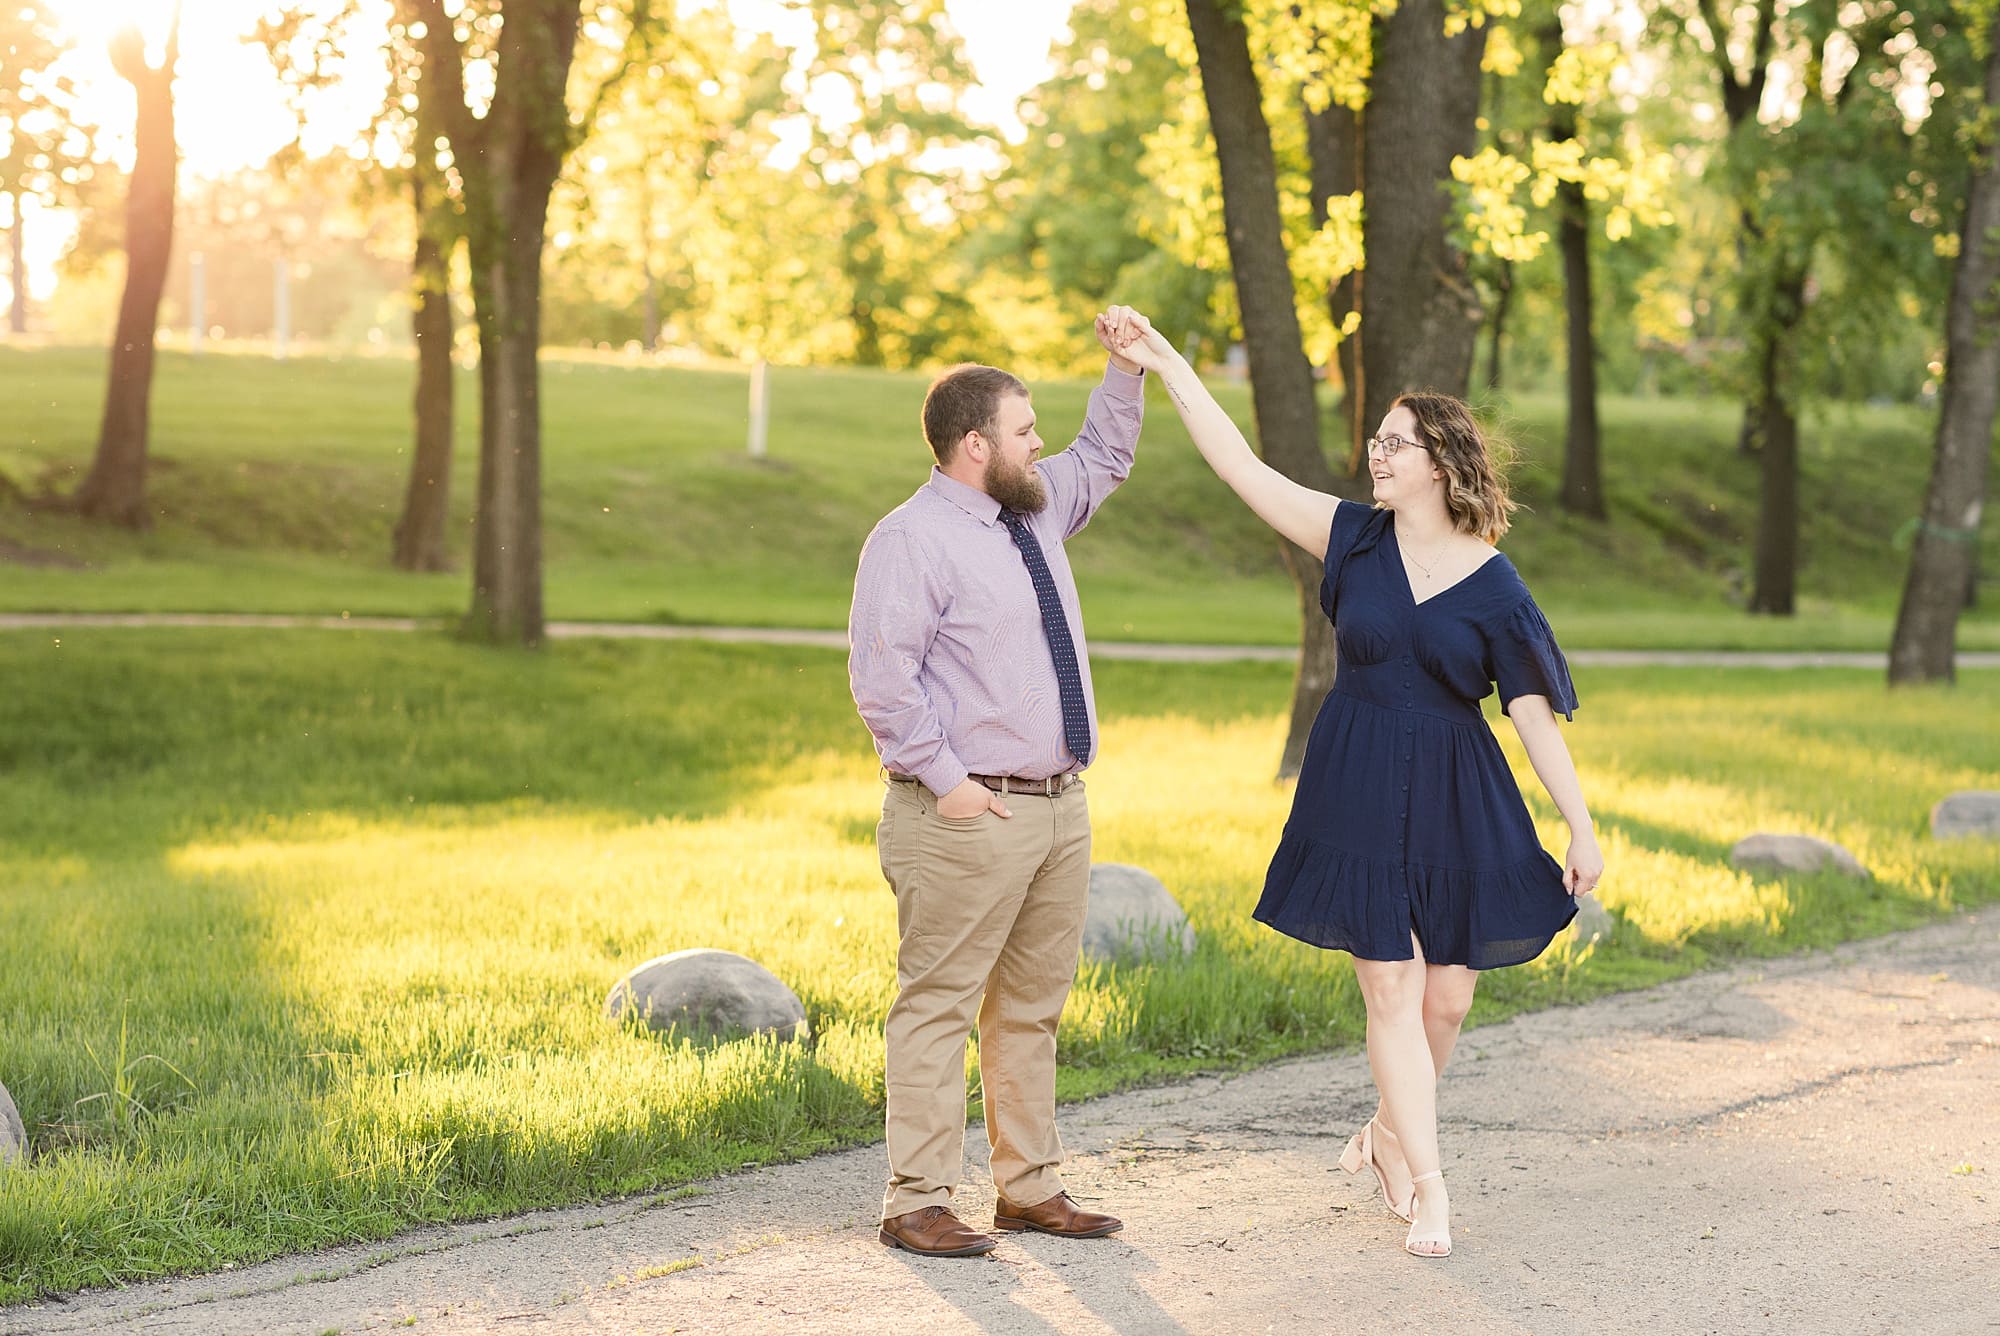 A couple in a navy dress and striped shirt dance during sunset at Lindenwood Park